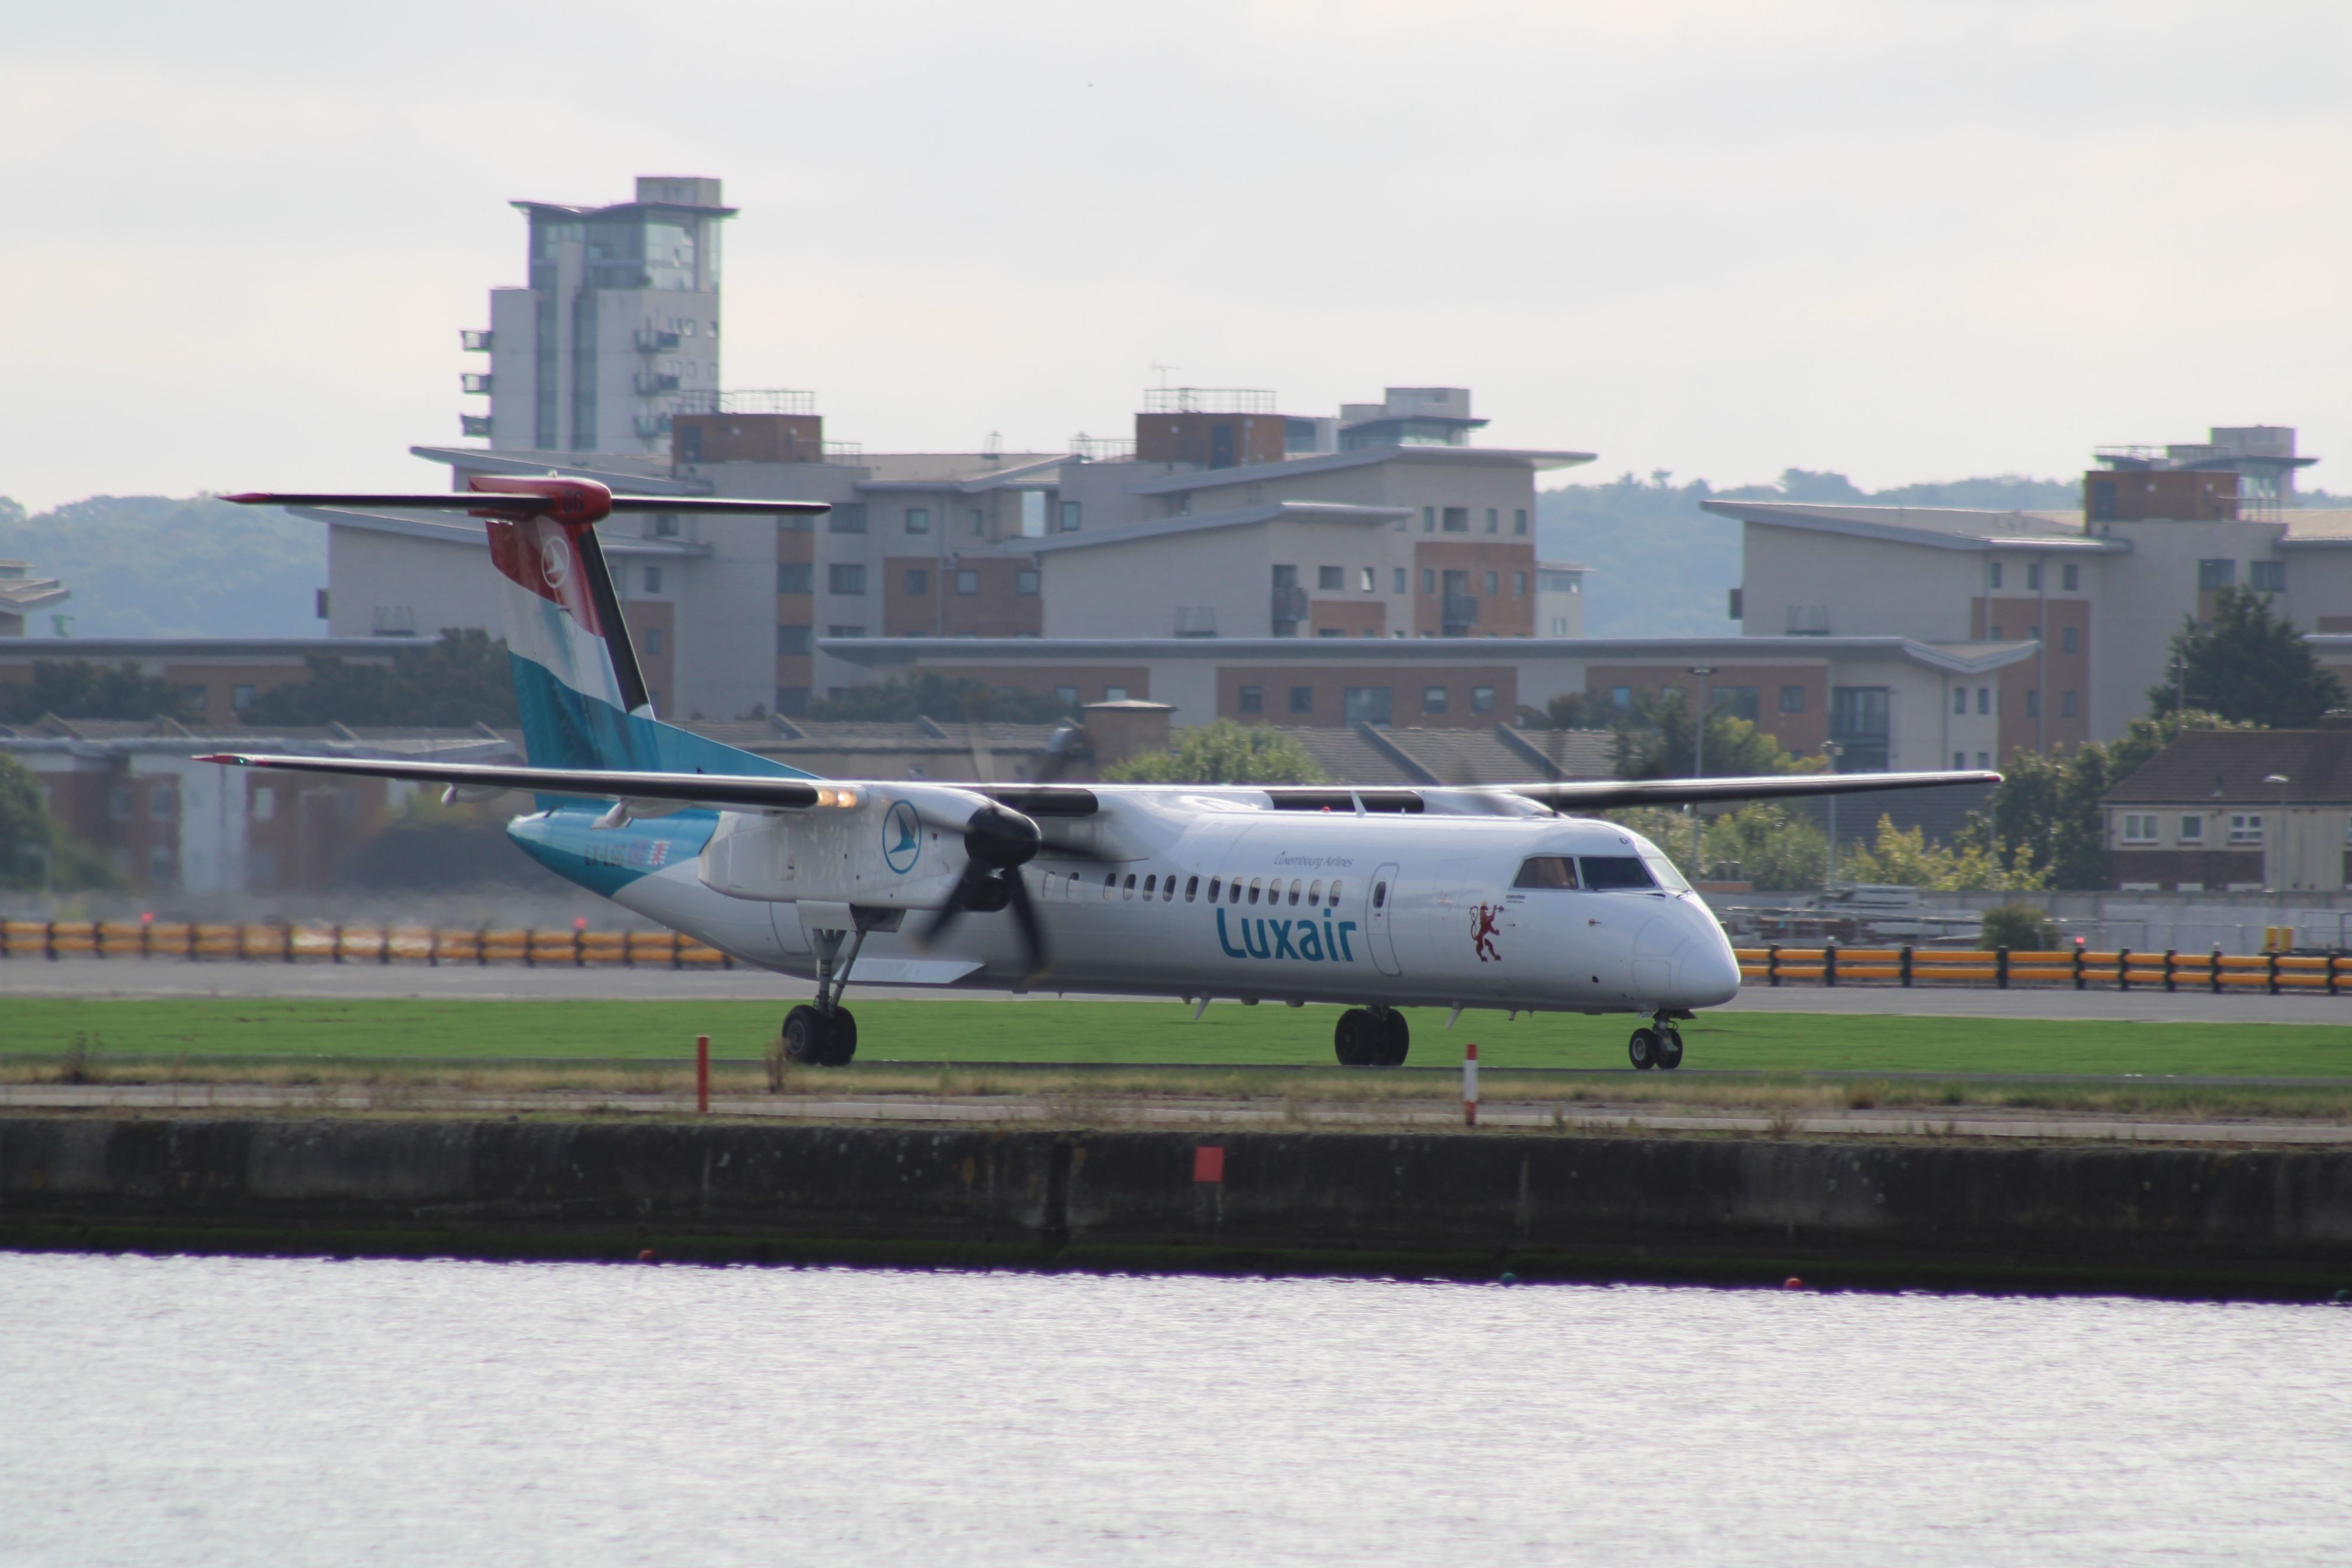 A Luxair Dash 8 Taxiing At London City Airport.